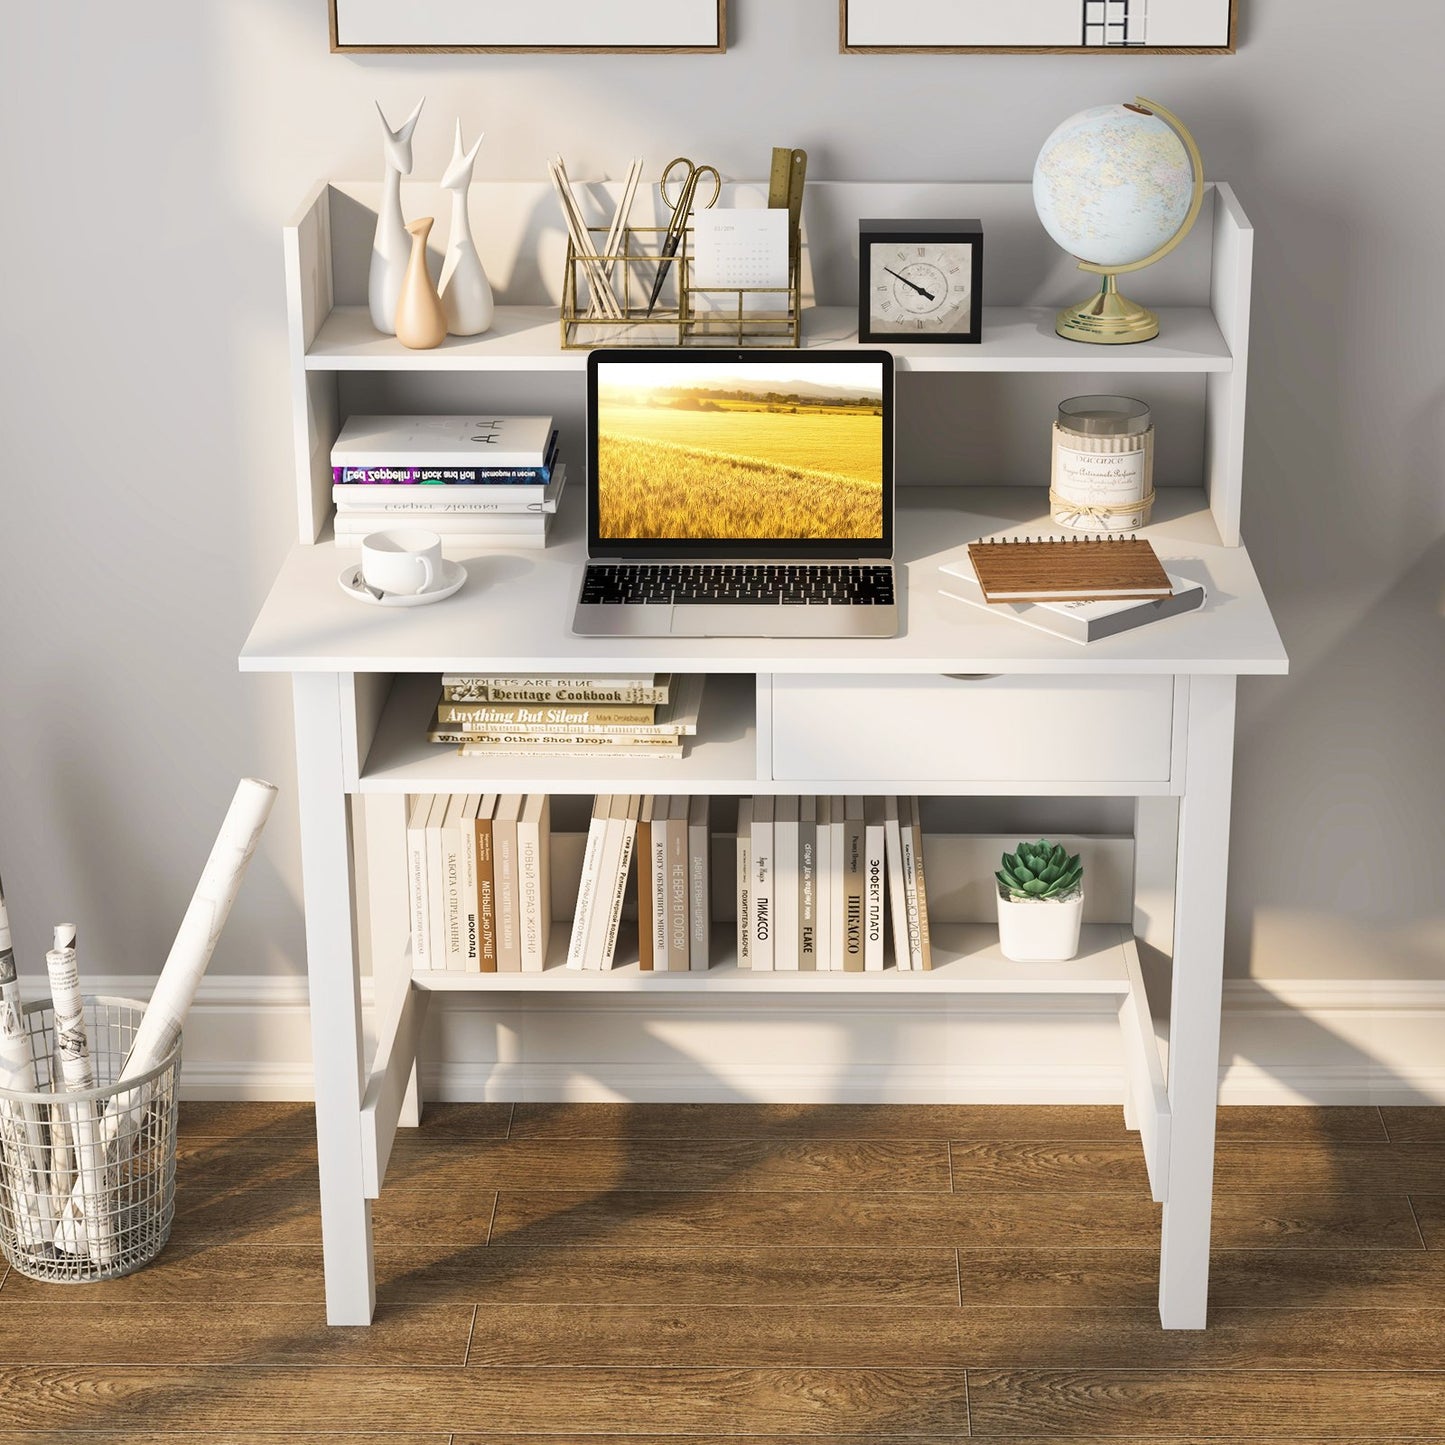 Home Office Computer Desk with Storage Shelves and Drawer Ideal for Working and Studying - Gallery Canada